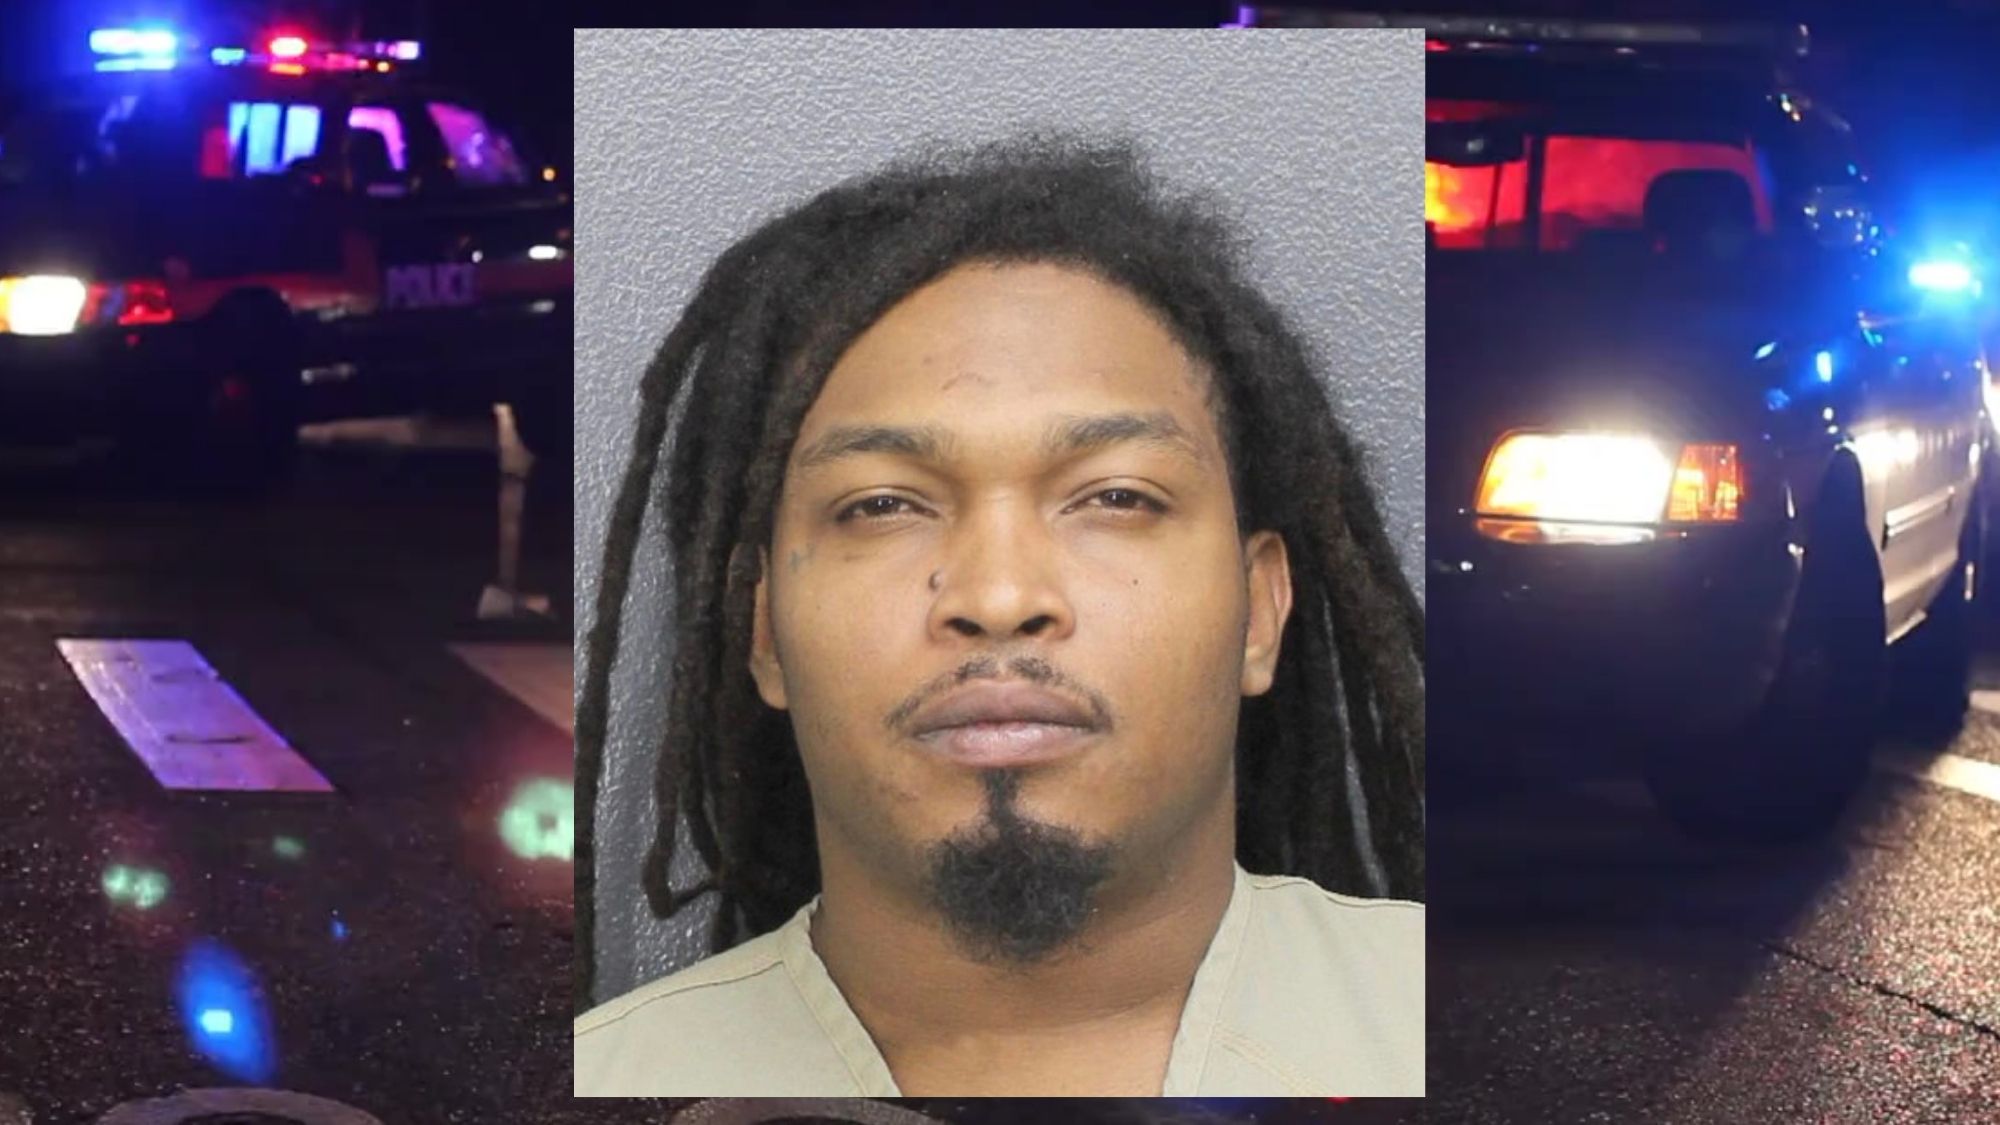 Coral Springs Man Arrested on Severe Felony Charges After Violent Assault Leaves Ex-Girlfriend Hospitalized